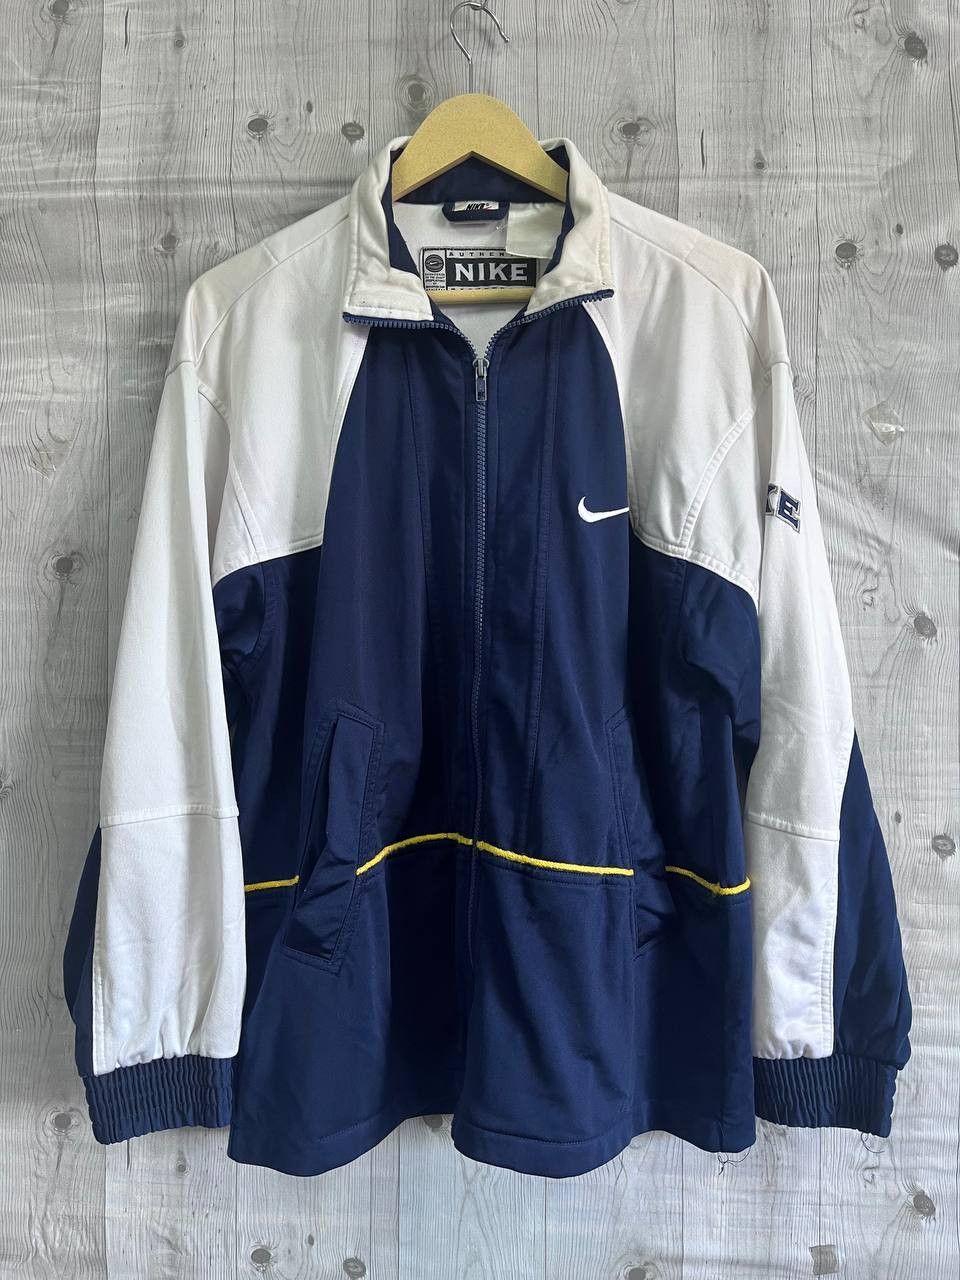 Vintage Nike Tracktop Made In USA - 1